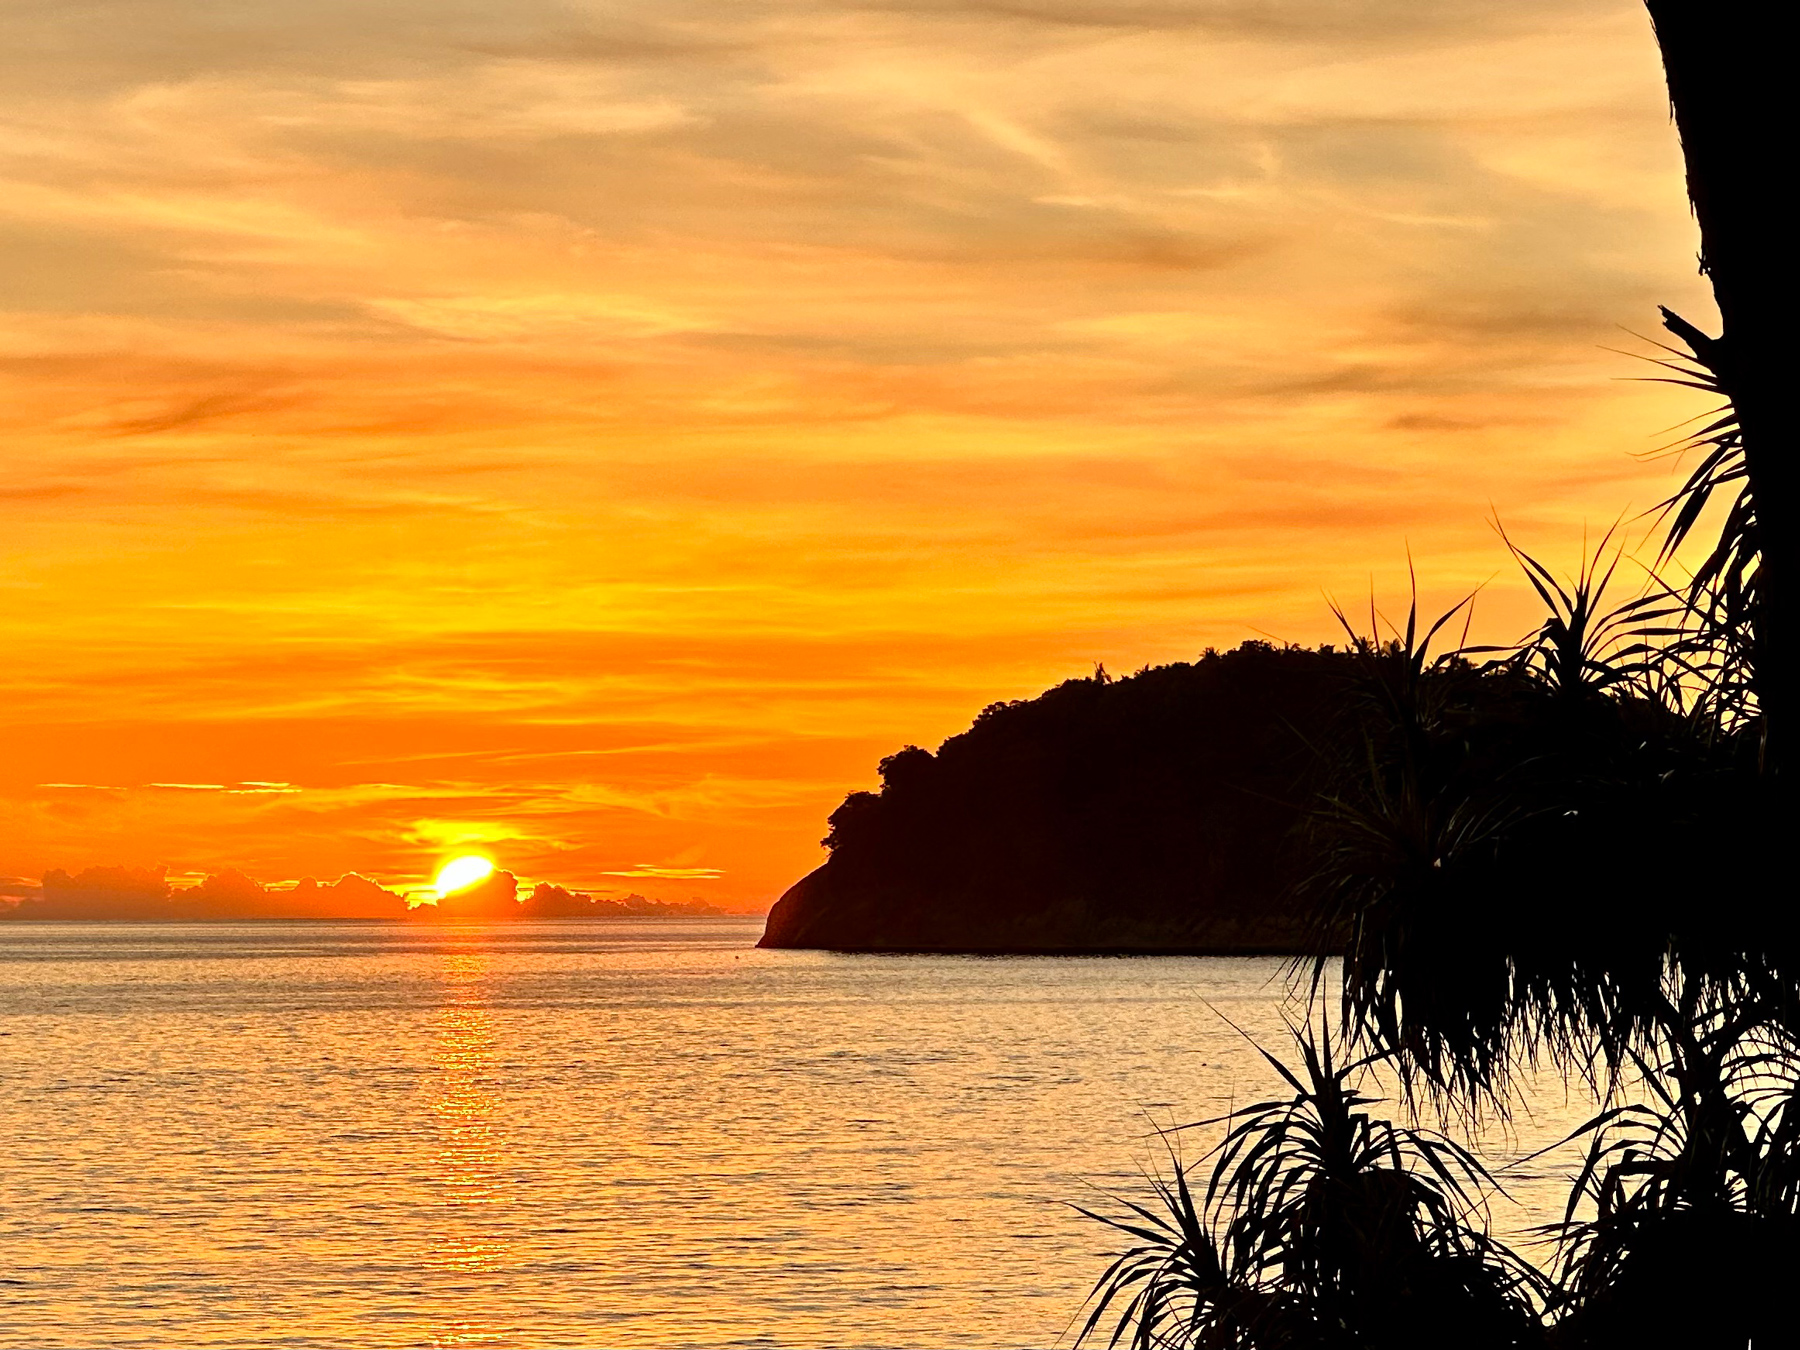 A bright orange sunset with an island and palm trees silhouetted in the foreground